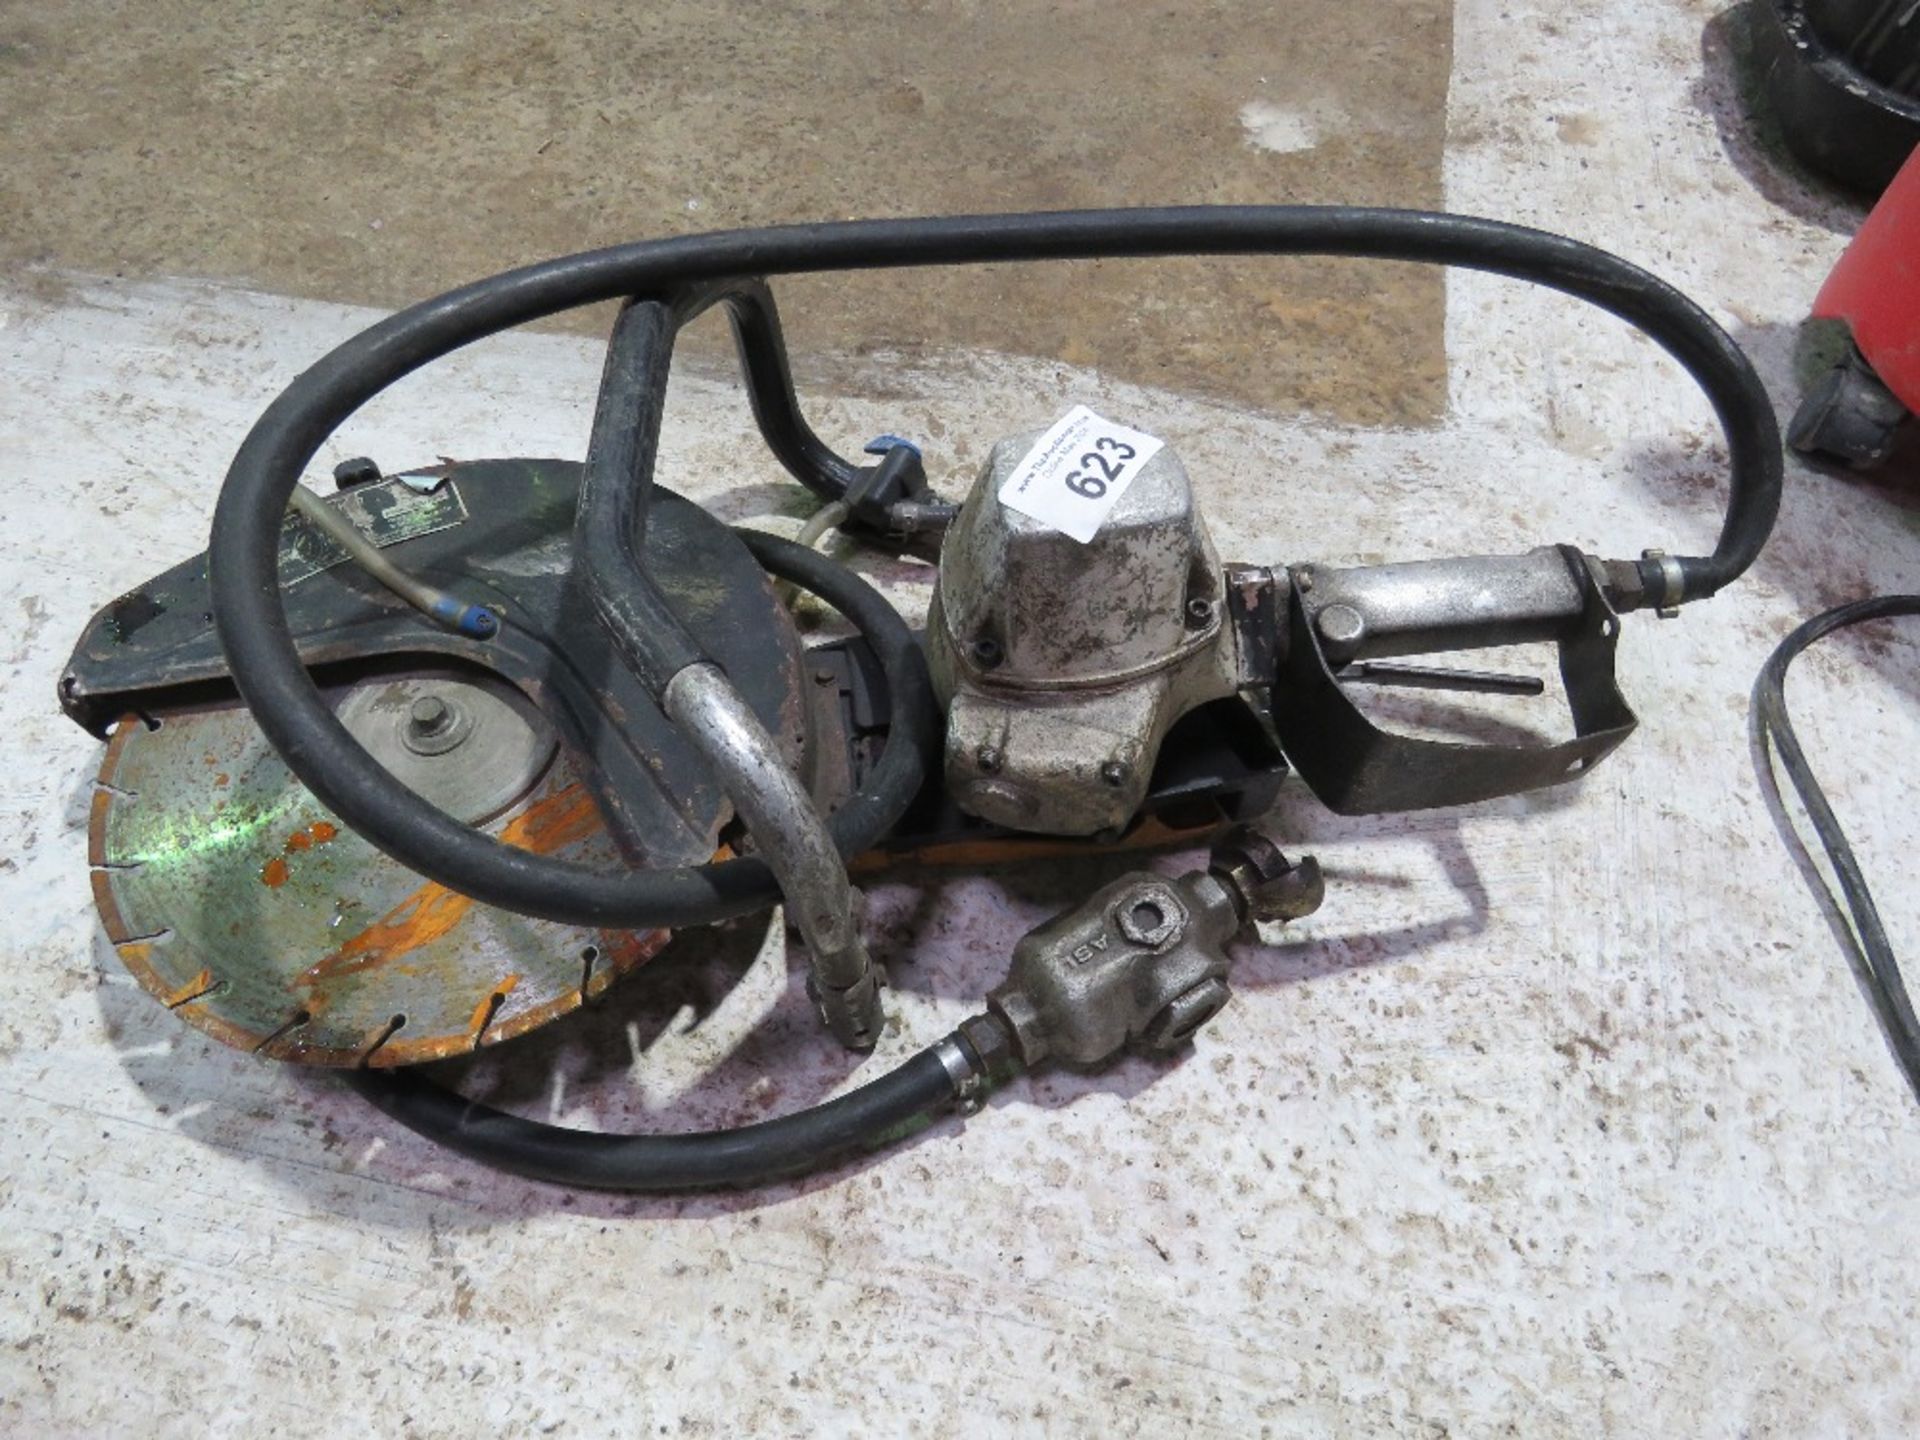 PARTNER AIR POWERED CUT OFF SAW.....THIS LOT IS SOLD UNDER THE AUCTIONEERS MARGIN SCHEME, THEREFORE